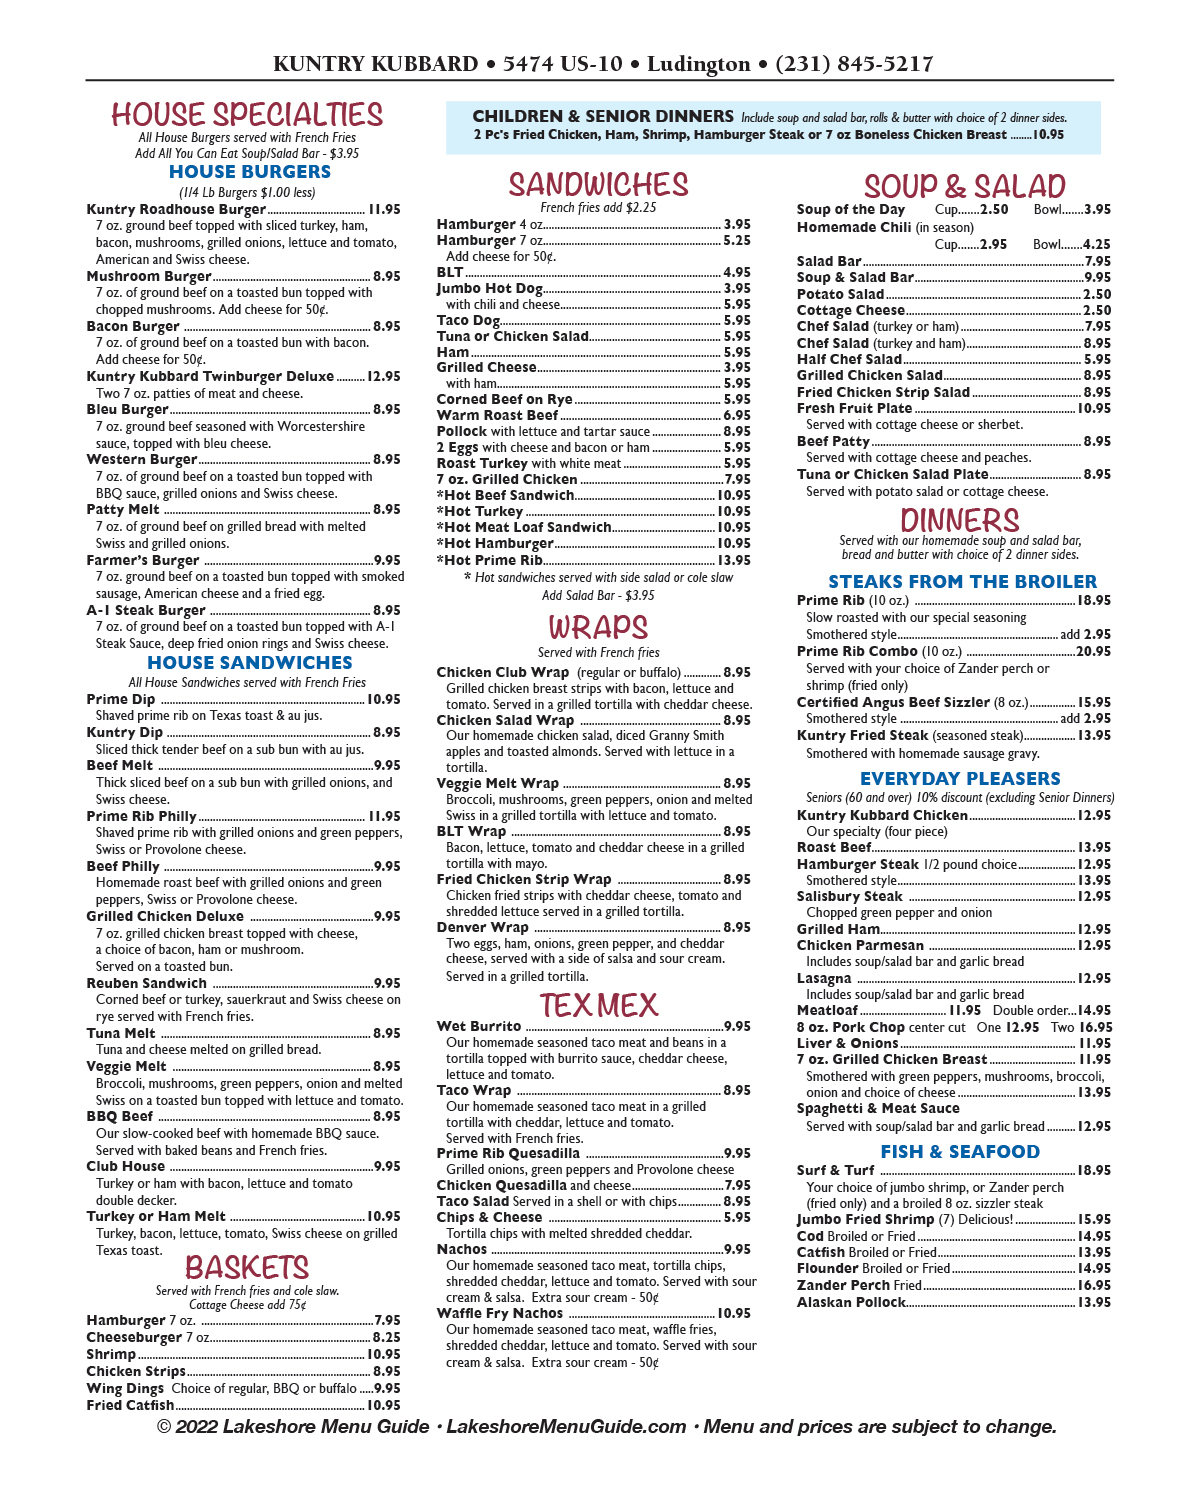 Menu for Kuntry Kubbard in downtown Ludington from the Lakeshore Menu Guide